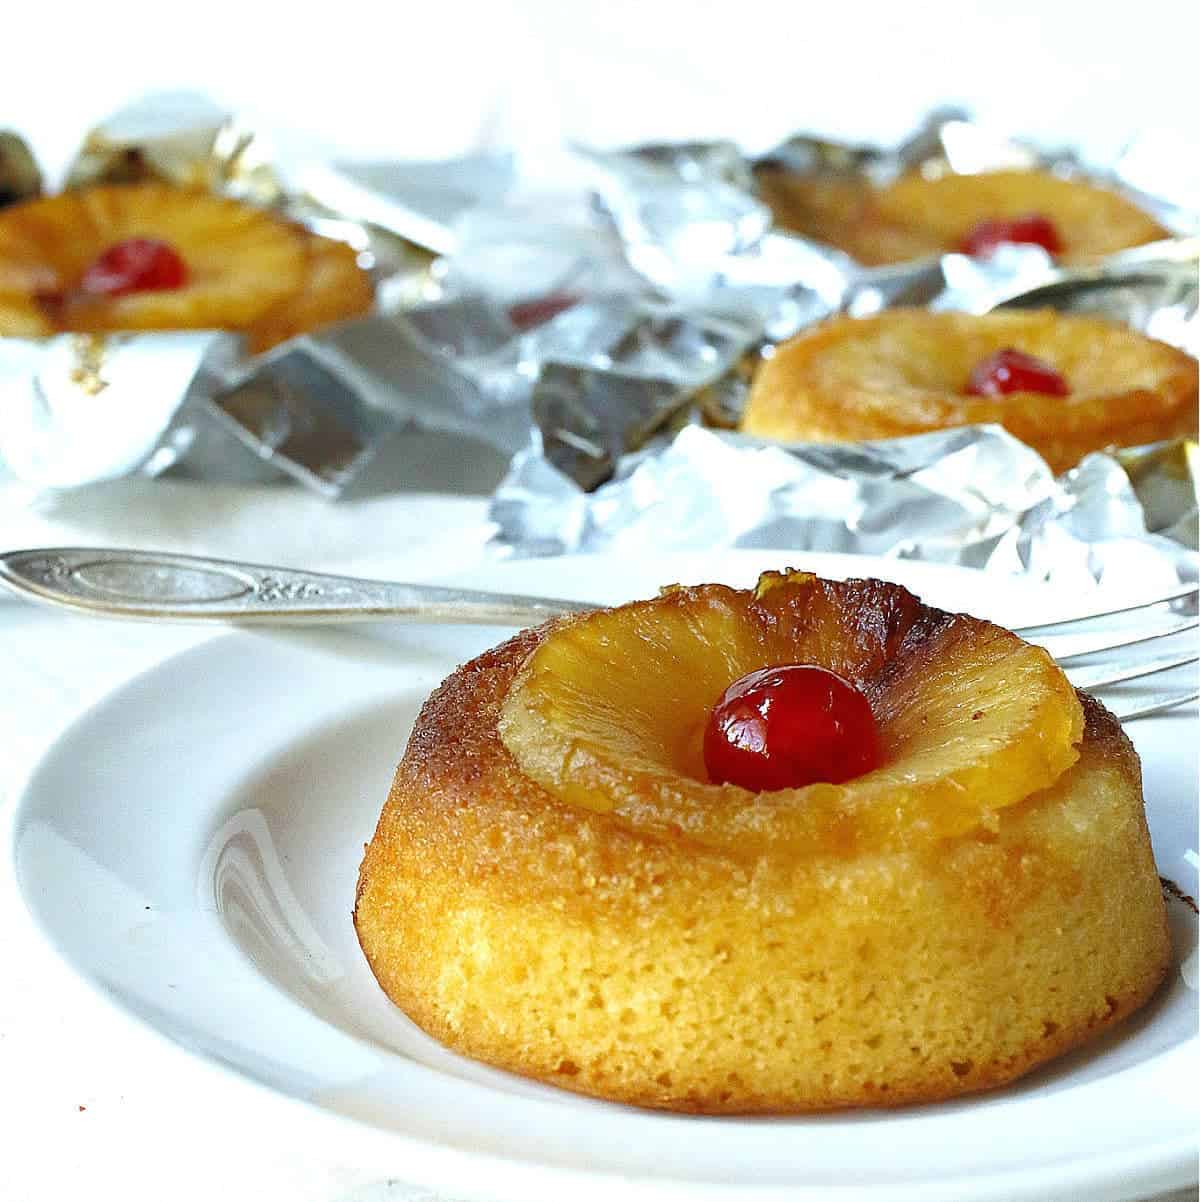 Individual pineapple upside-down cakes with cherries on top, presented on a white background.